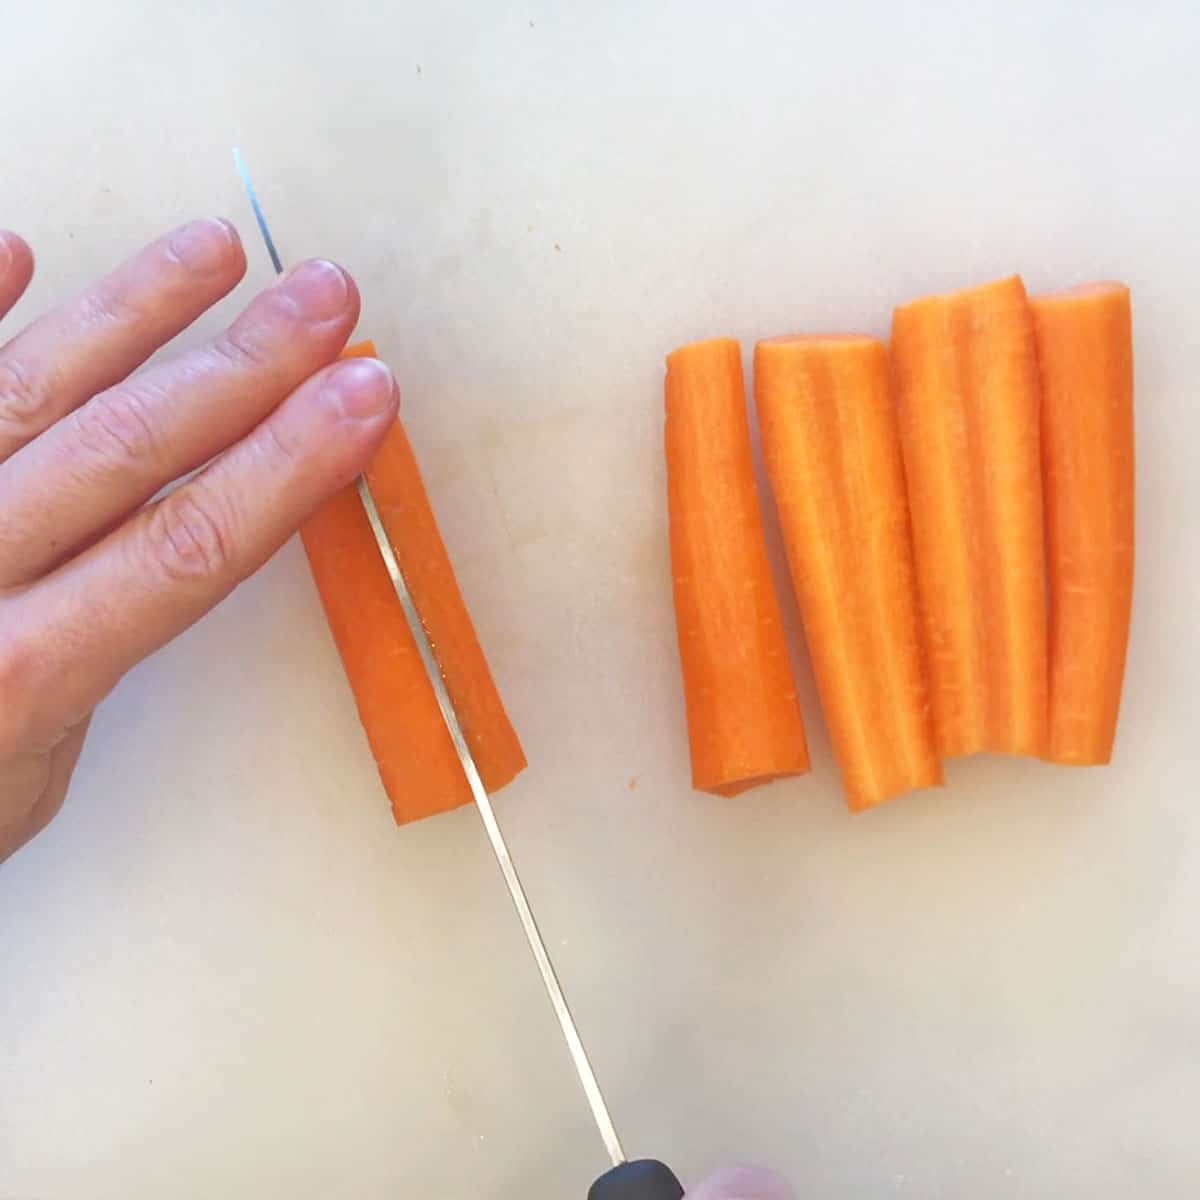 Prepping the carrots.